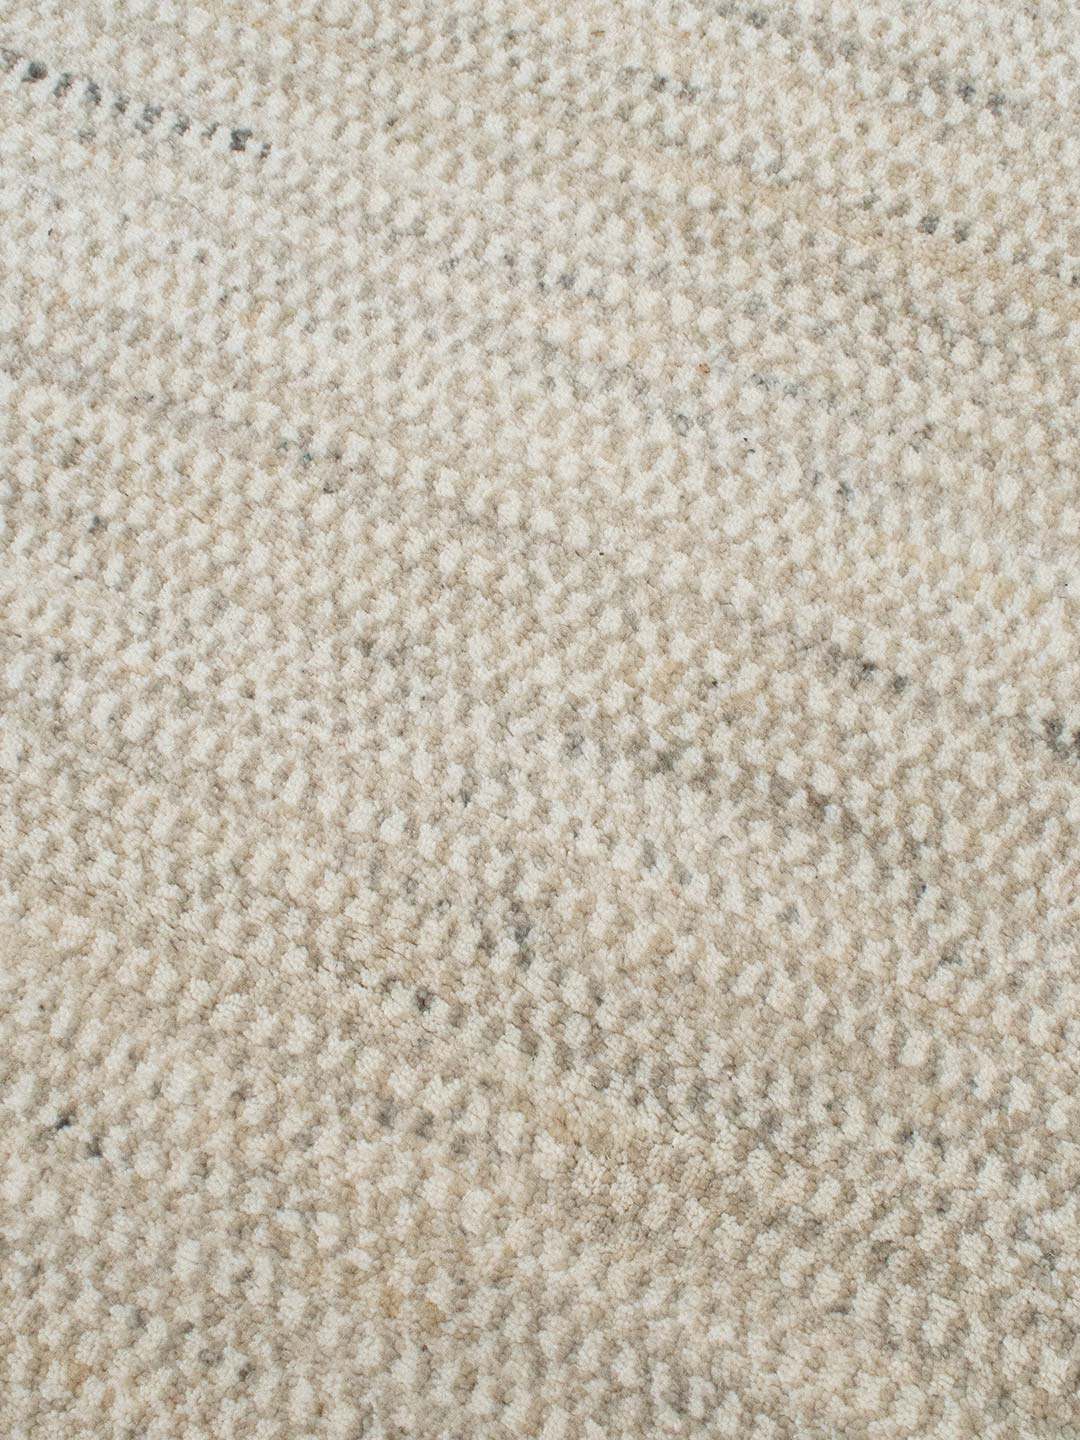 Mystique Rug in Wool and colour Ivory Sand detail of pattern